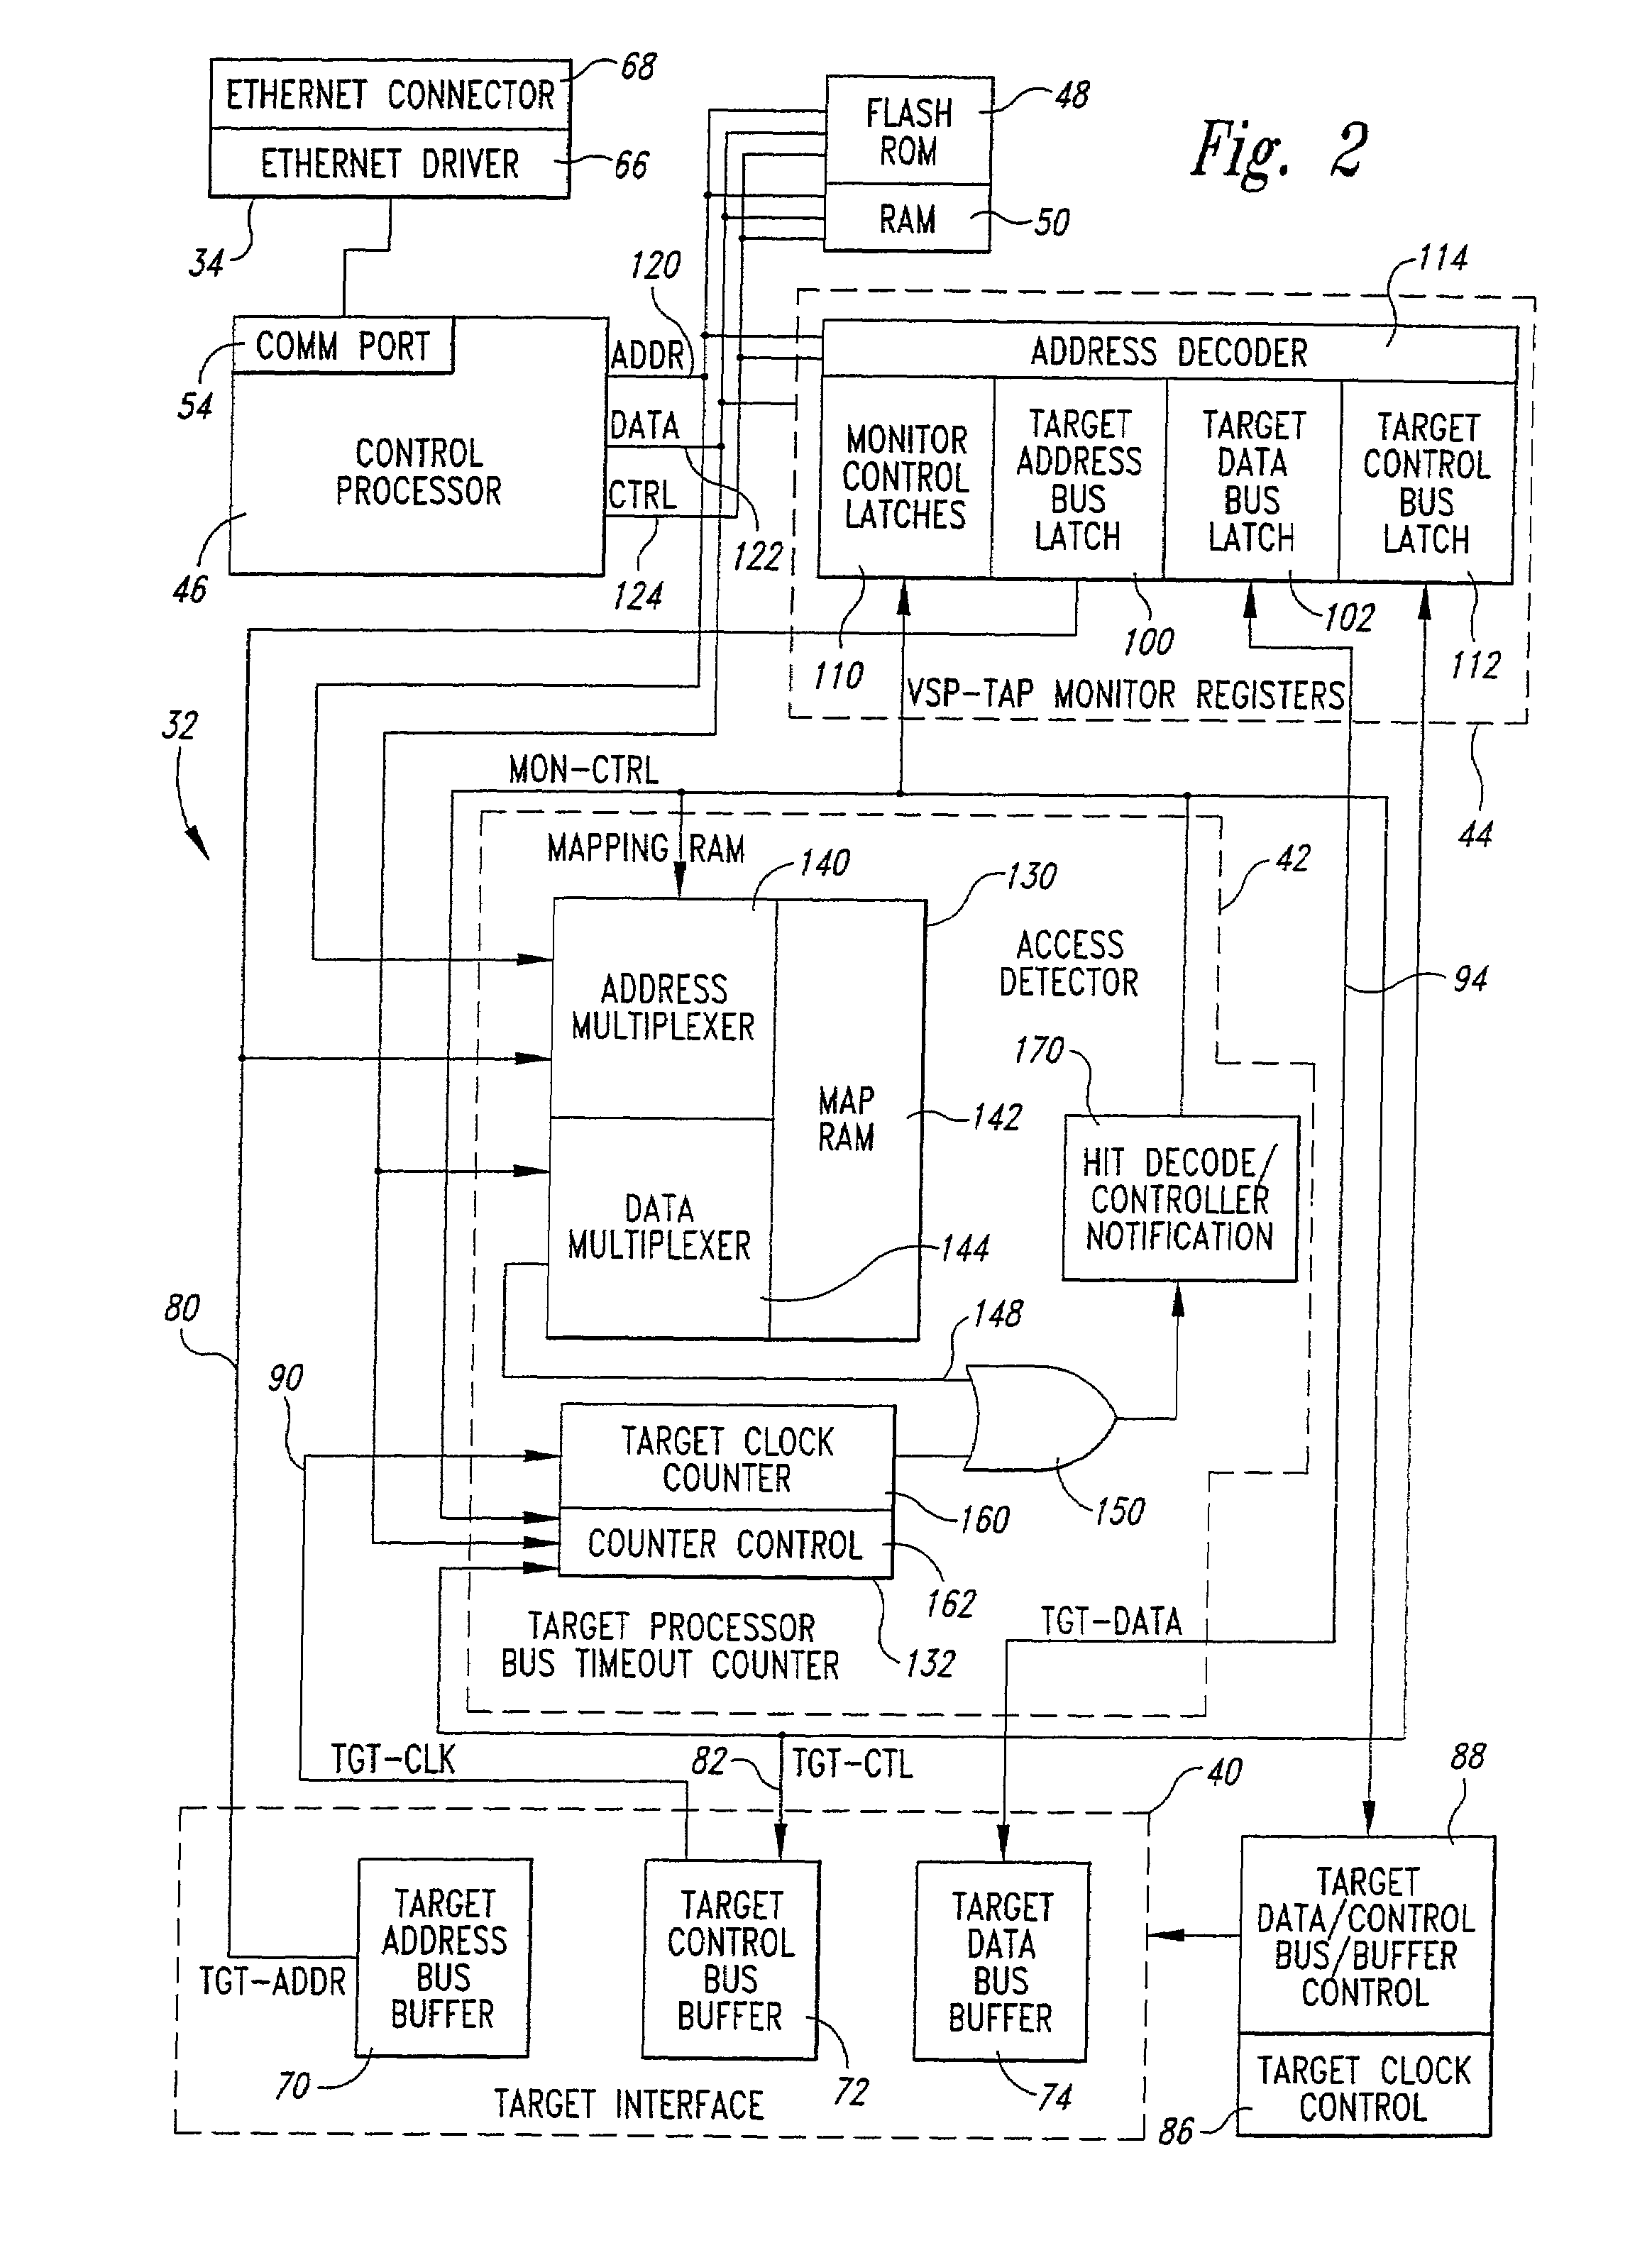 System and method for testing an embedded microprocessor system containing physical and/or simulated hardware